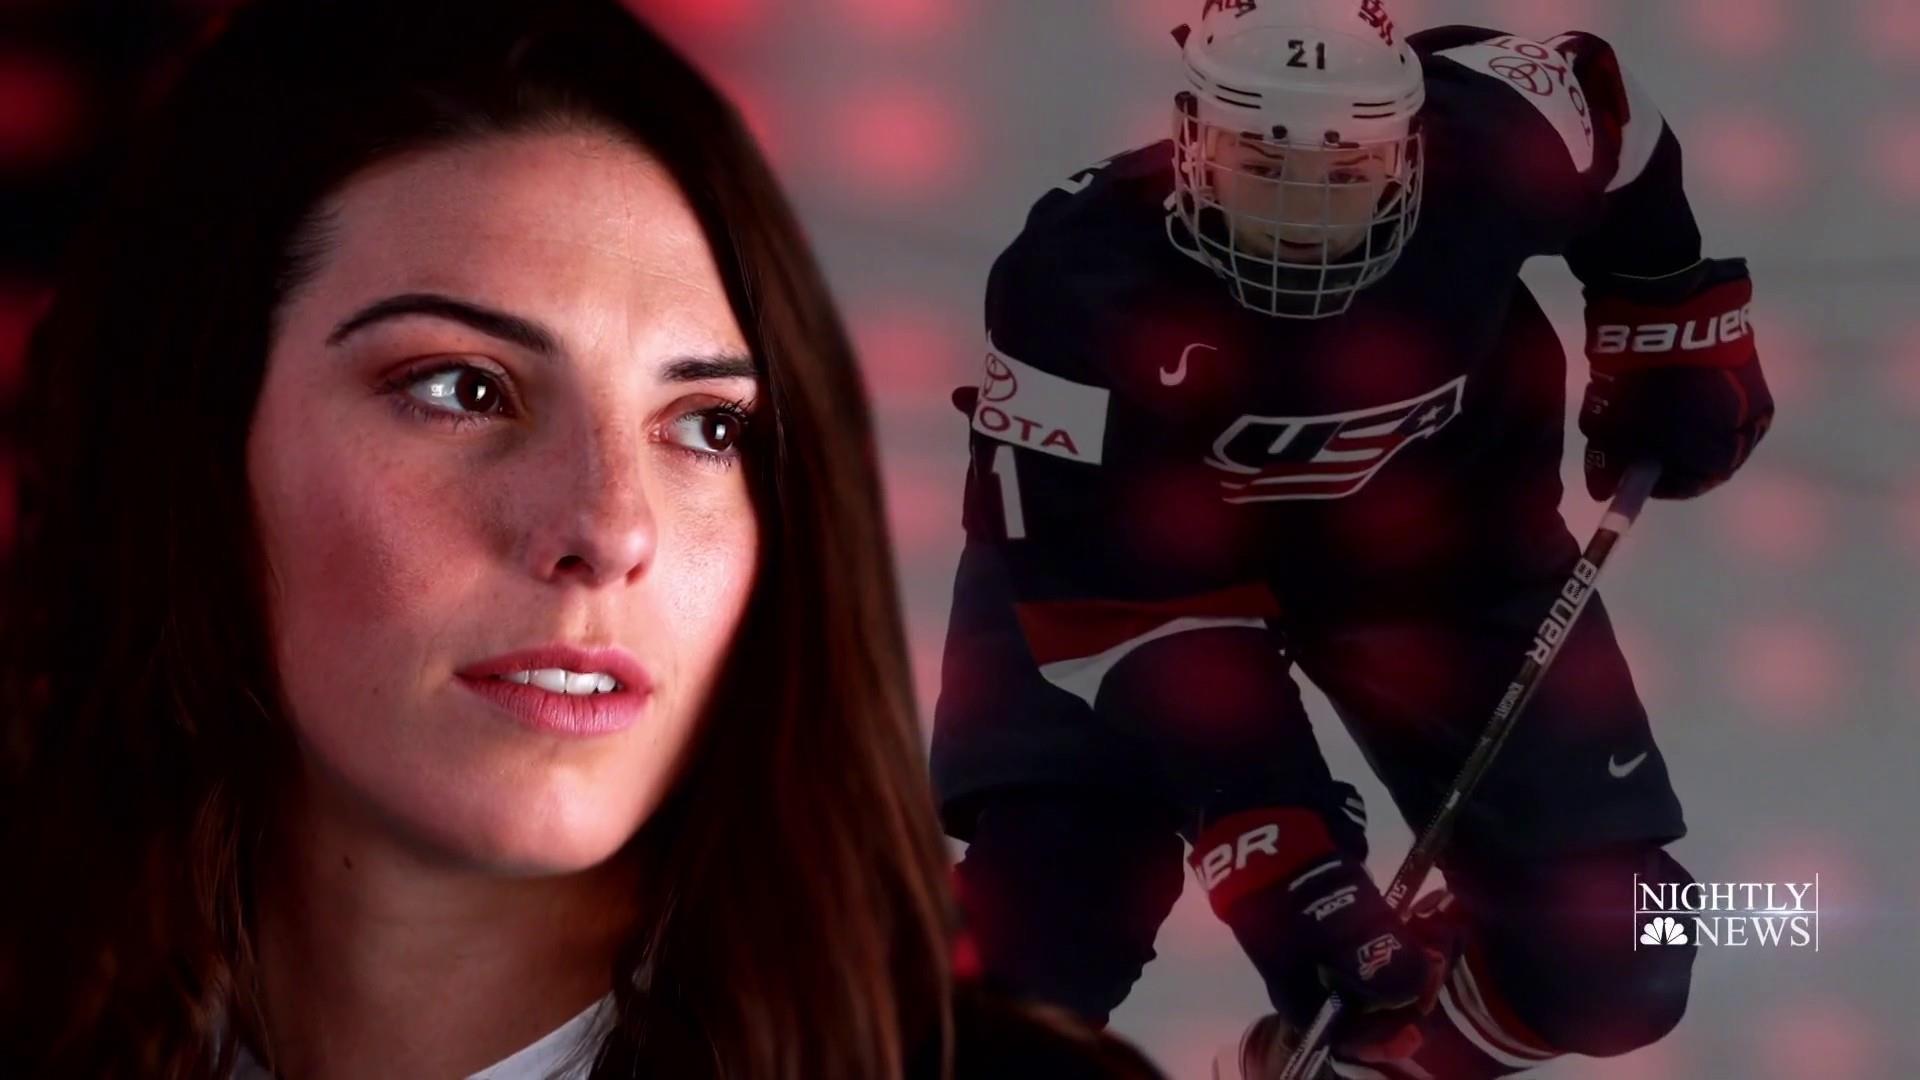 Hilary Knight chases Olympic gold for U.S. women’s hockey.